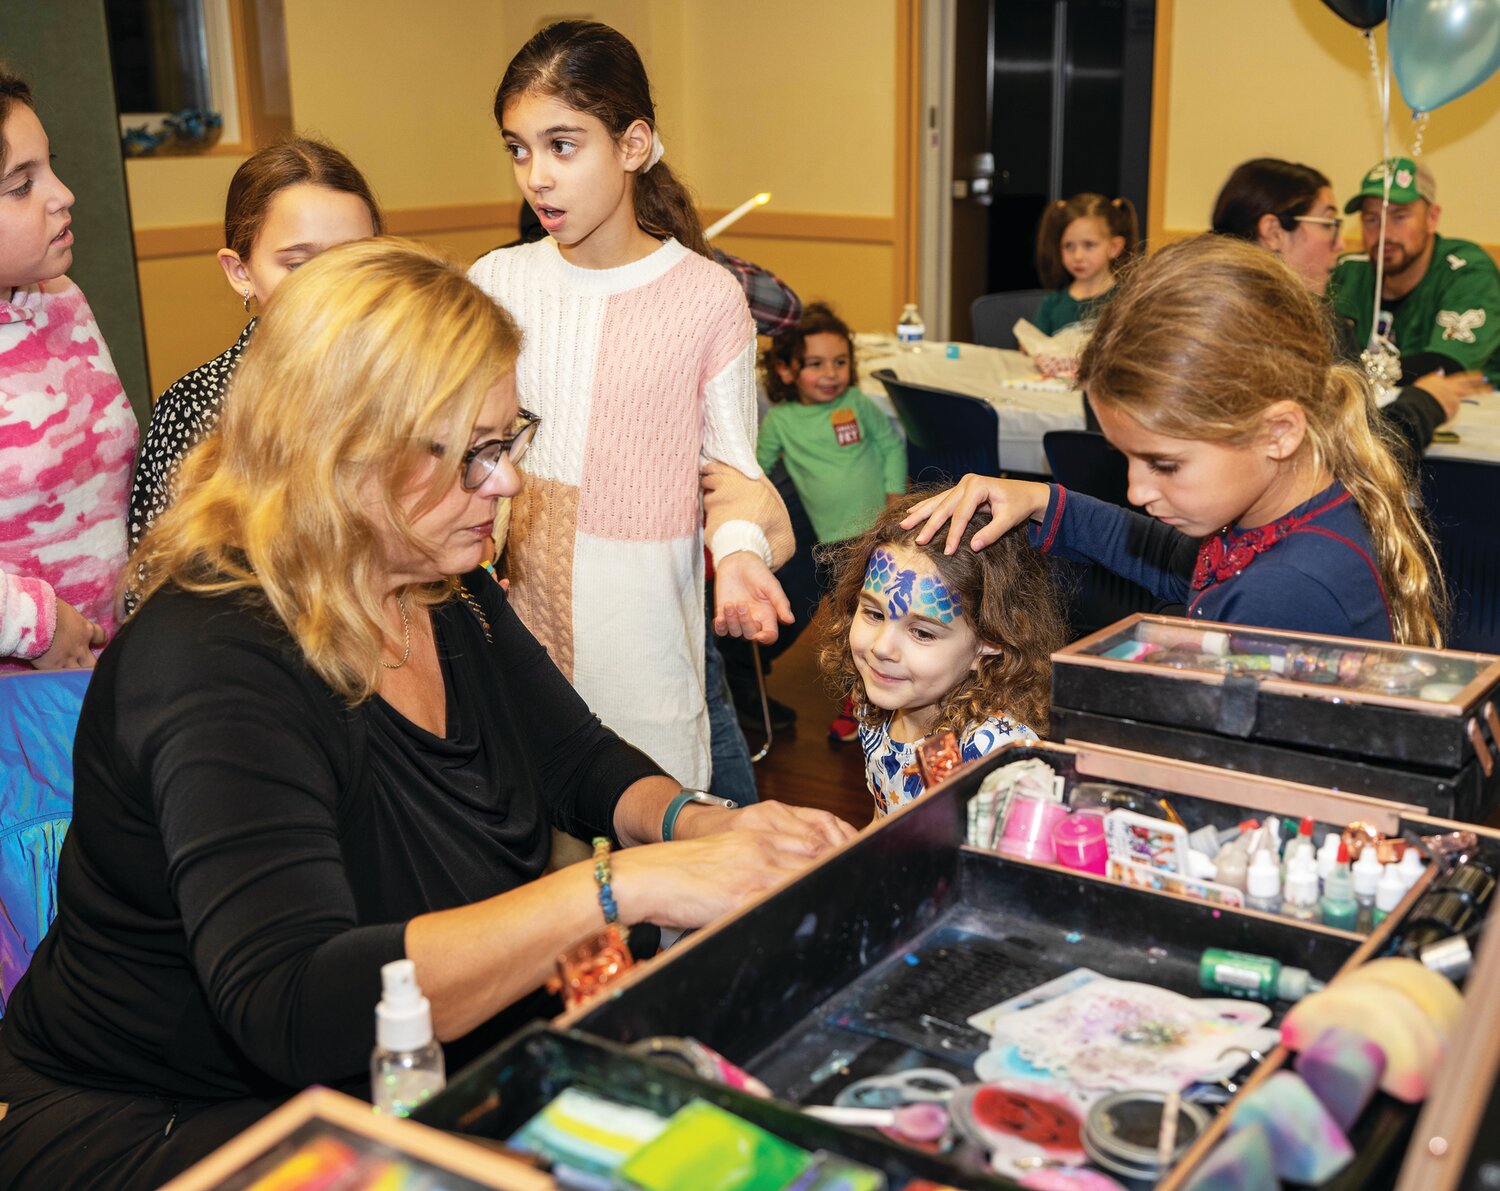 Children get their faces painted at the Family Chanukah Celebration.